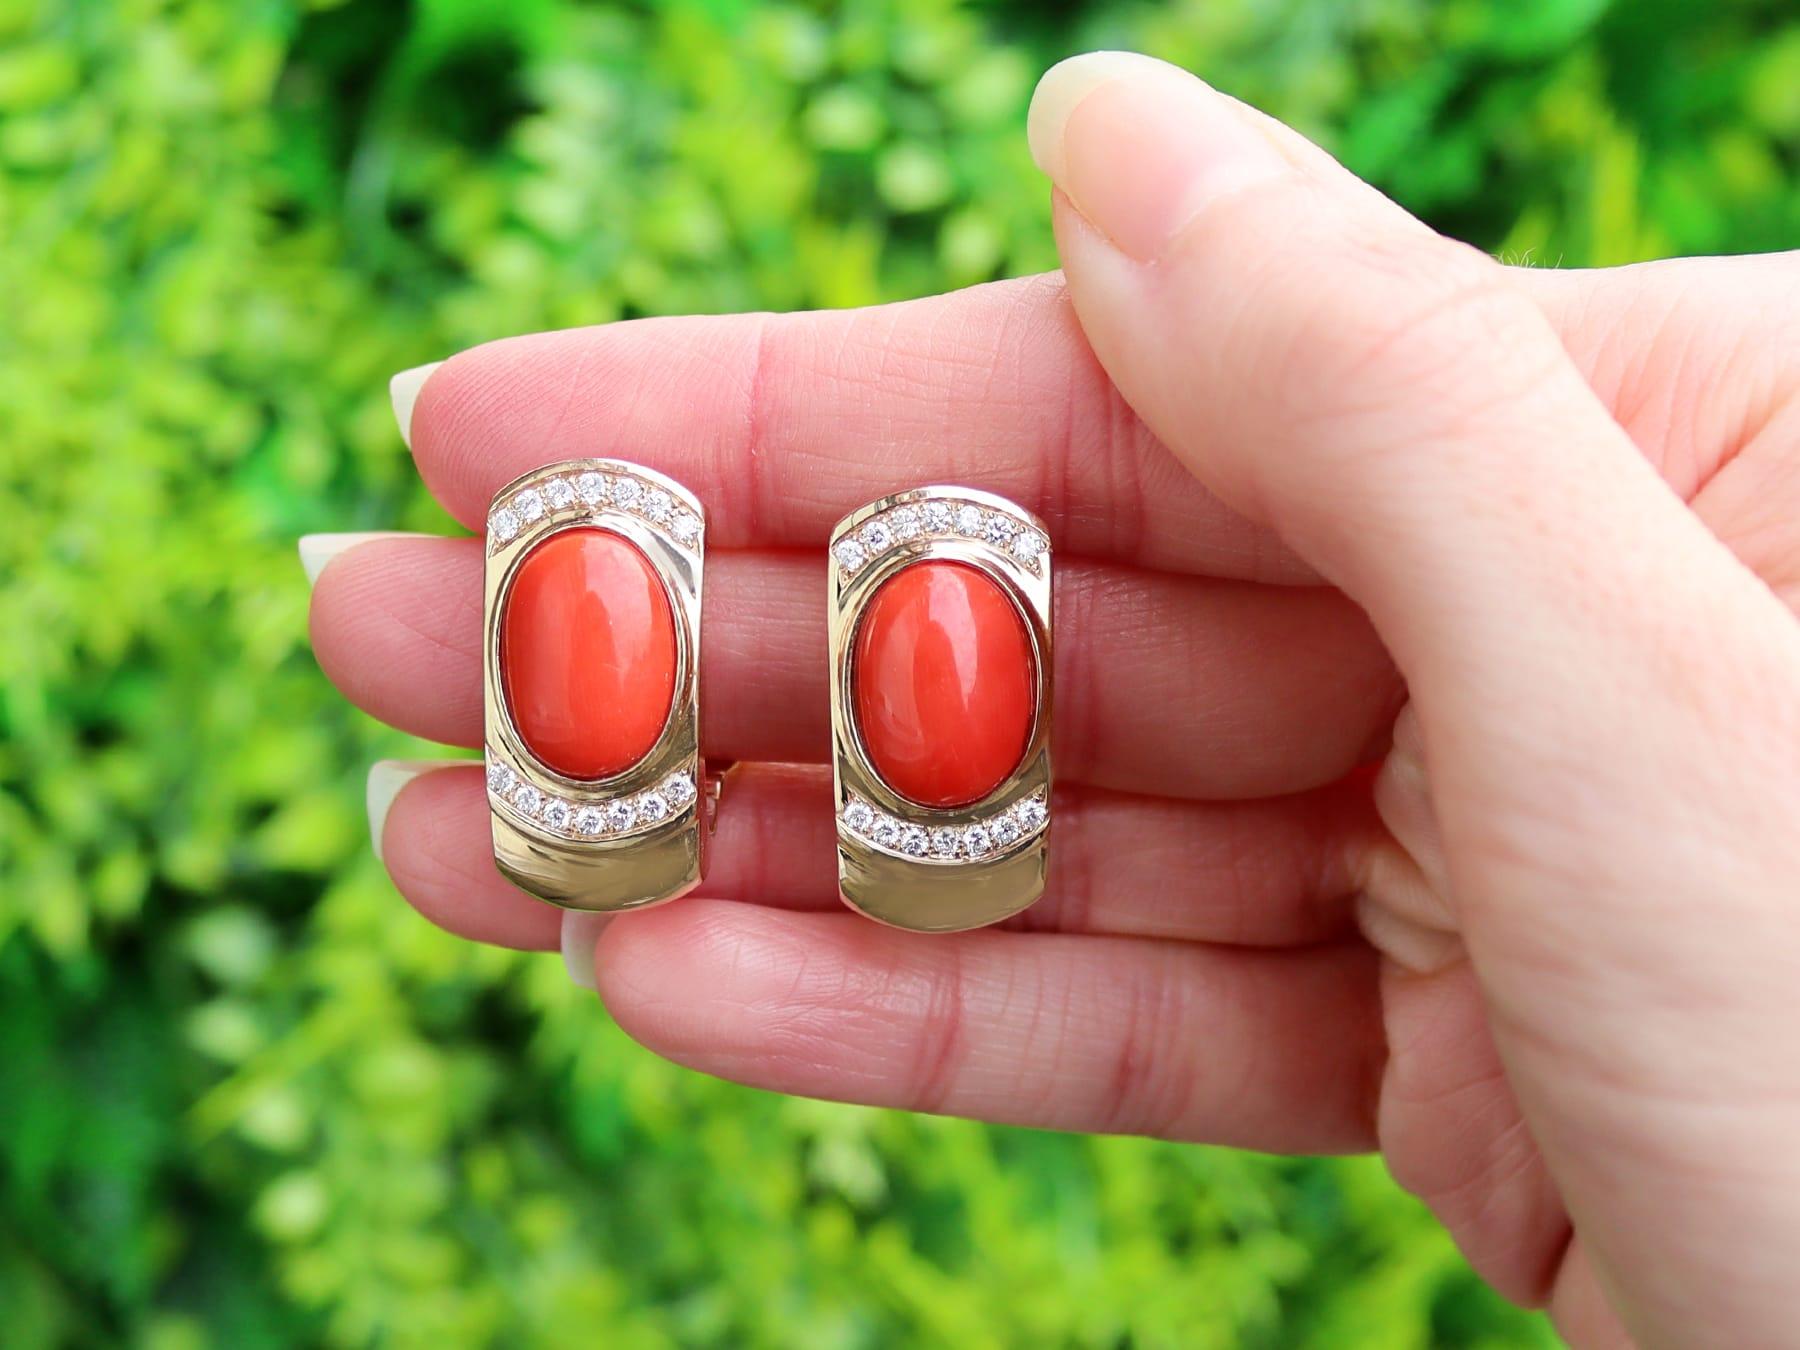 A stunning, fine and impressive pair of vintage 1970s 6.22 carat red coral and 0.70 carat diamond, 14 karat yellow gold earrings; part of our diverse vintage jewelry and estate jewelry collections.

These stunning, fine and impressive vintage